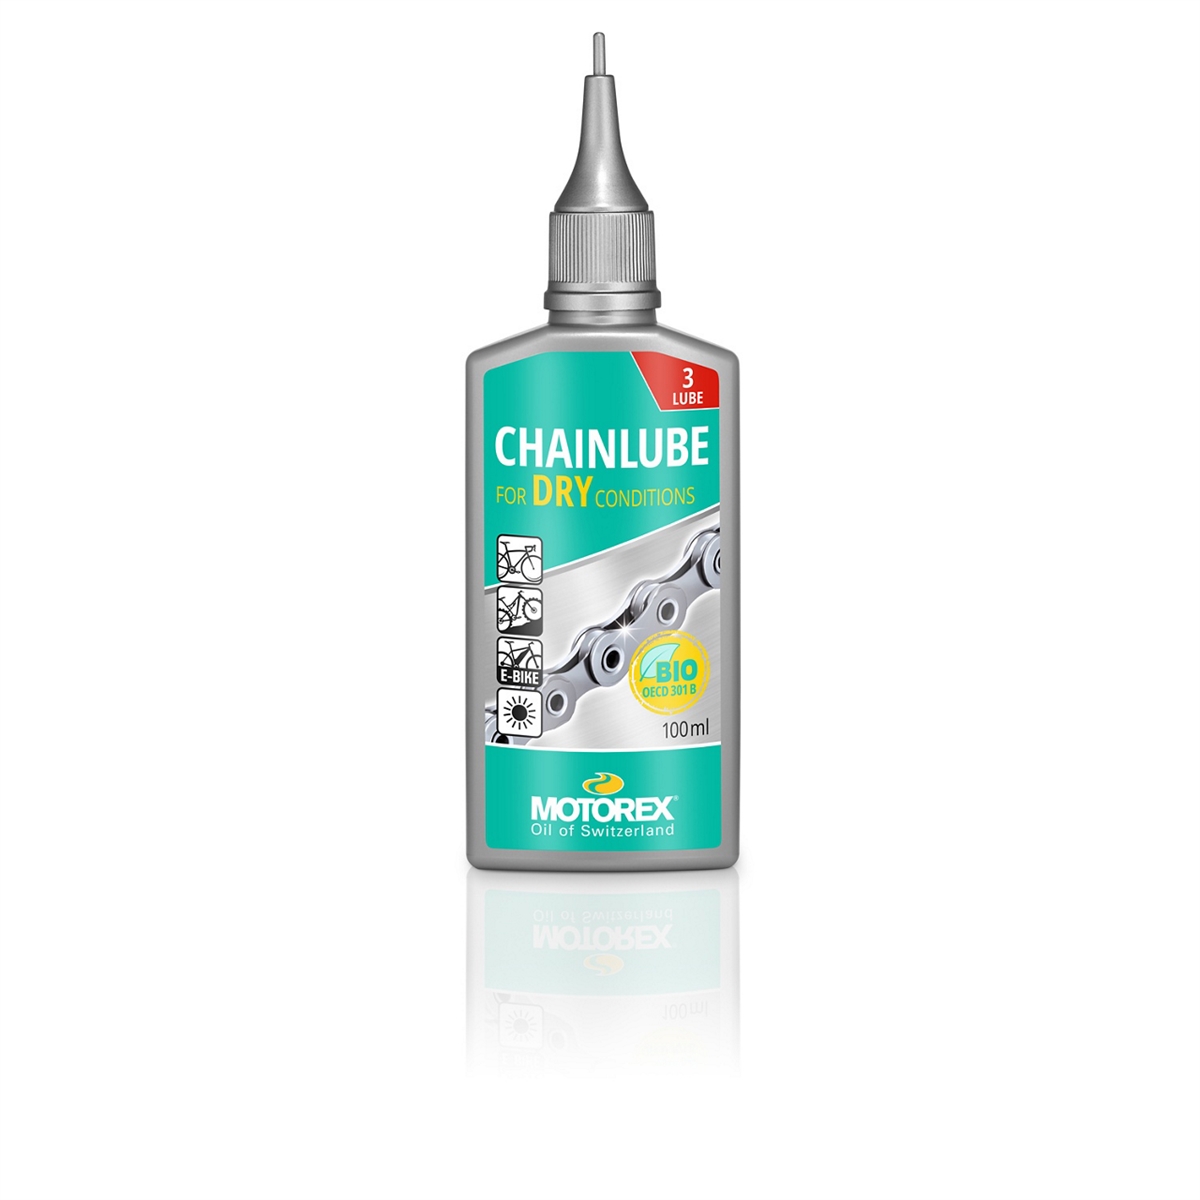 Chainlube Dry Lubricant Dry Conditions 100ml